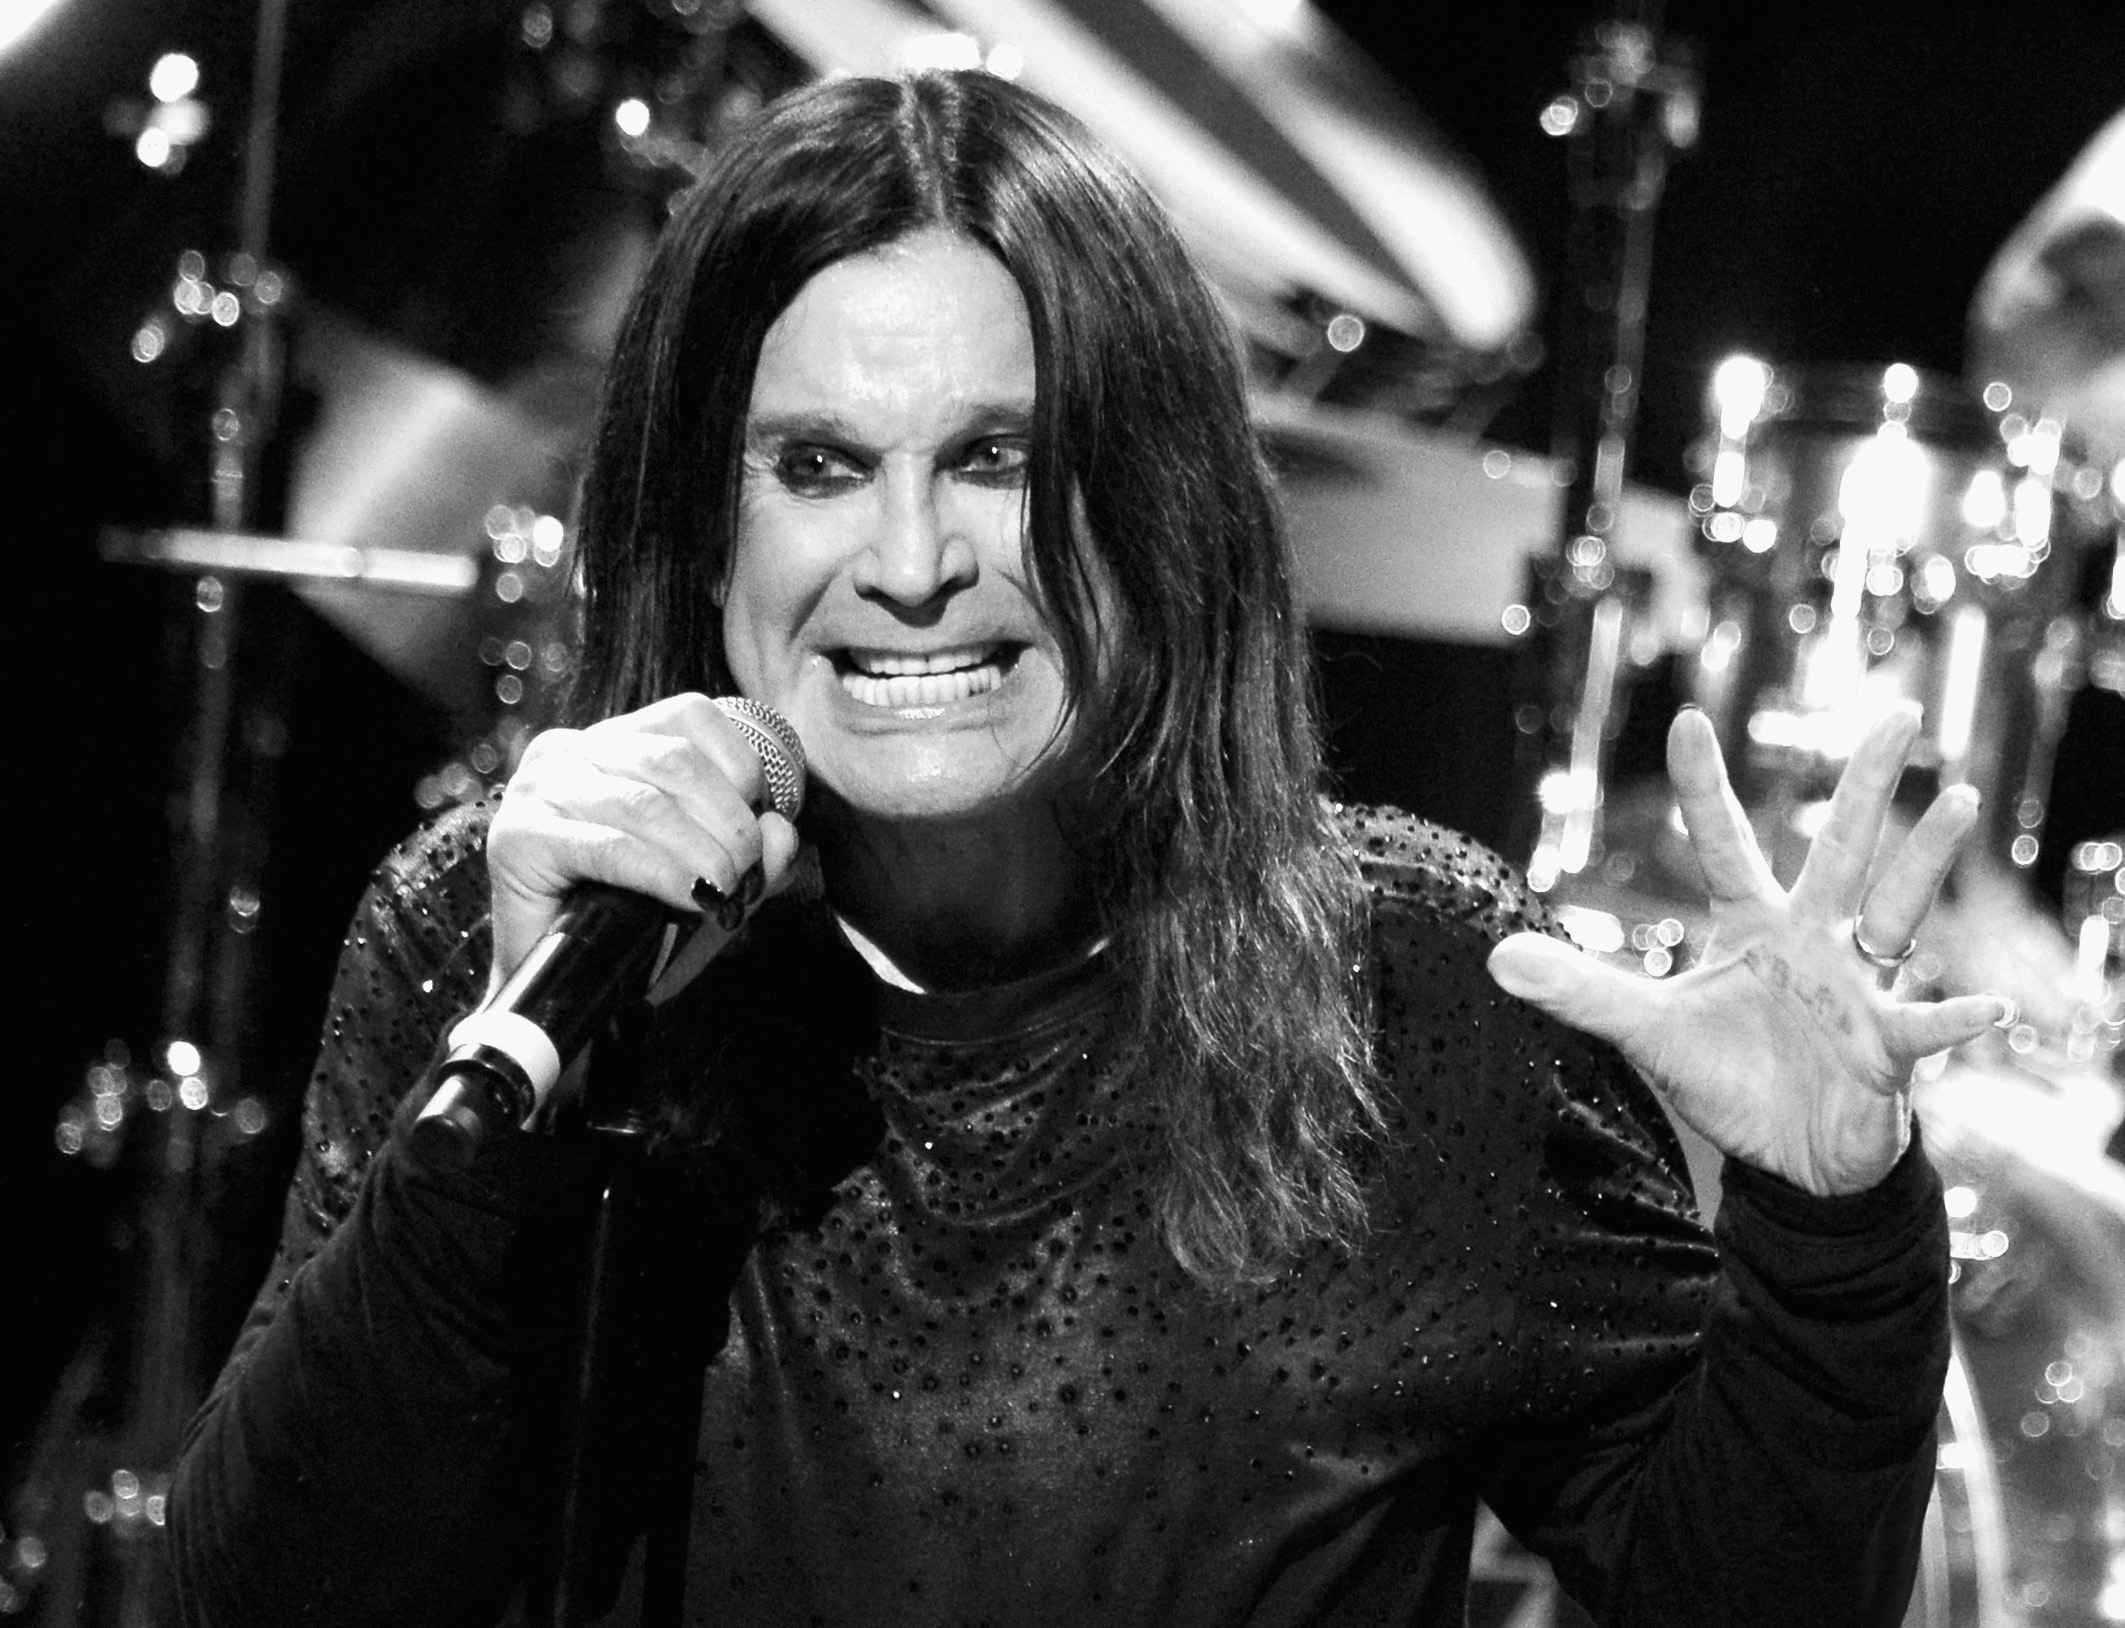 LOS ANGELES, CA - MAY 12: Singer Ozzy Osbbourne performs at the 2014 10th Annual MusiCares MAP Fund...